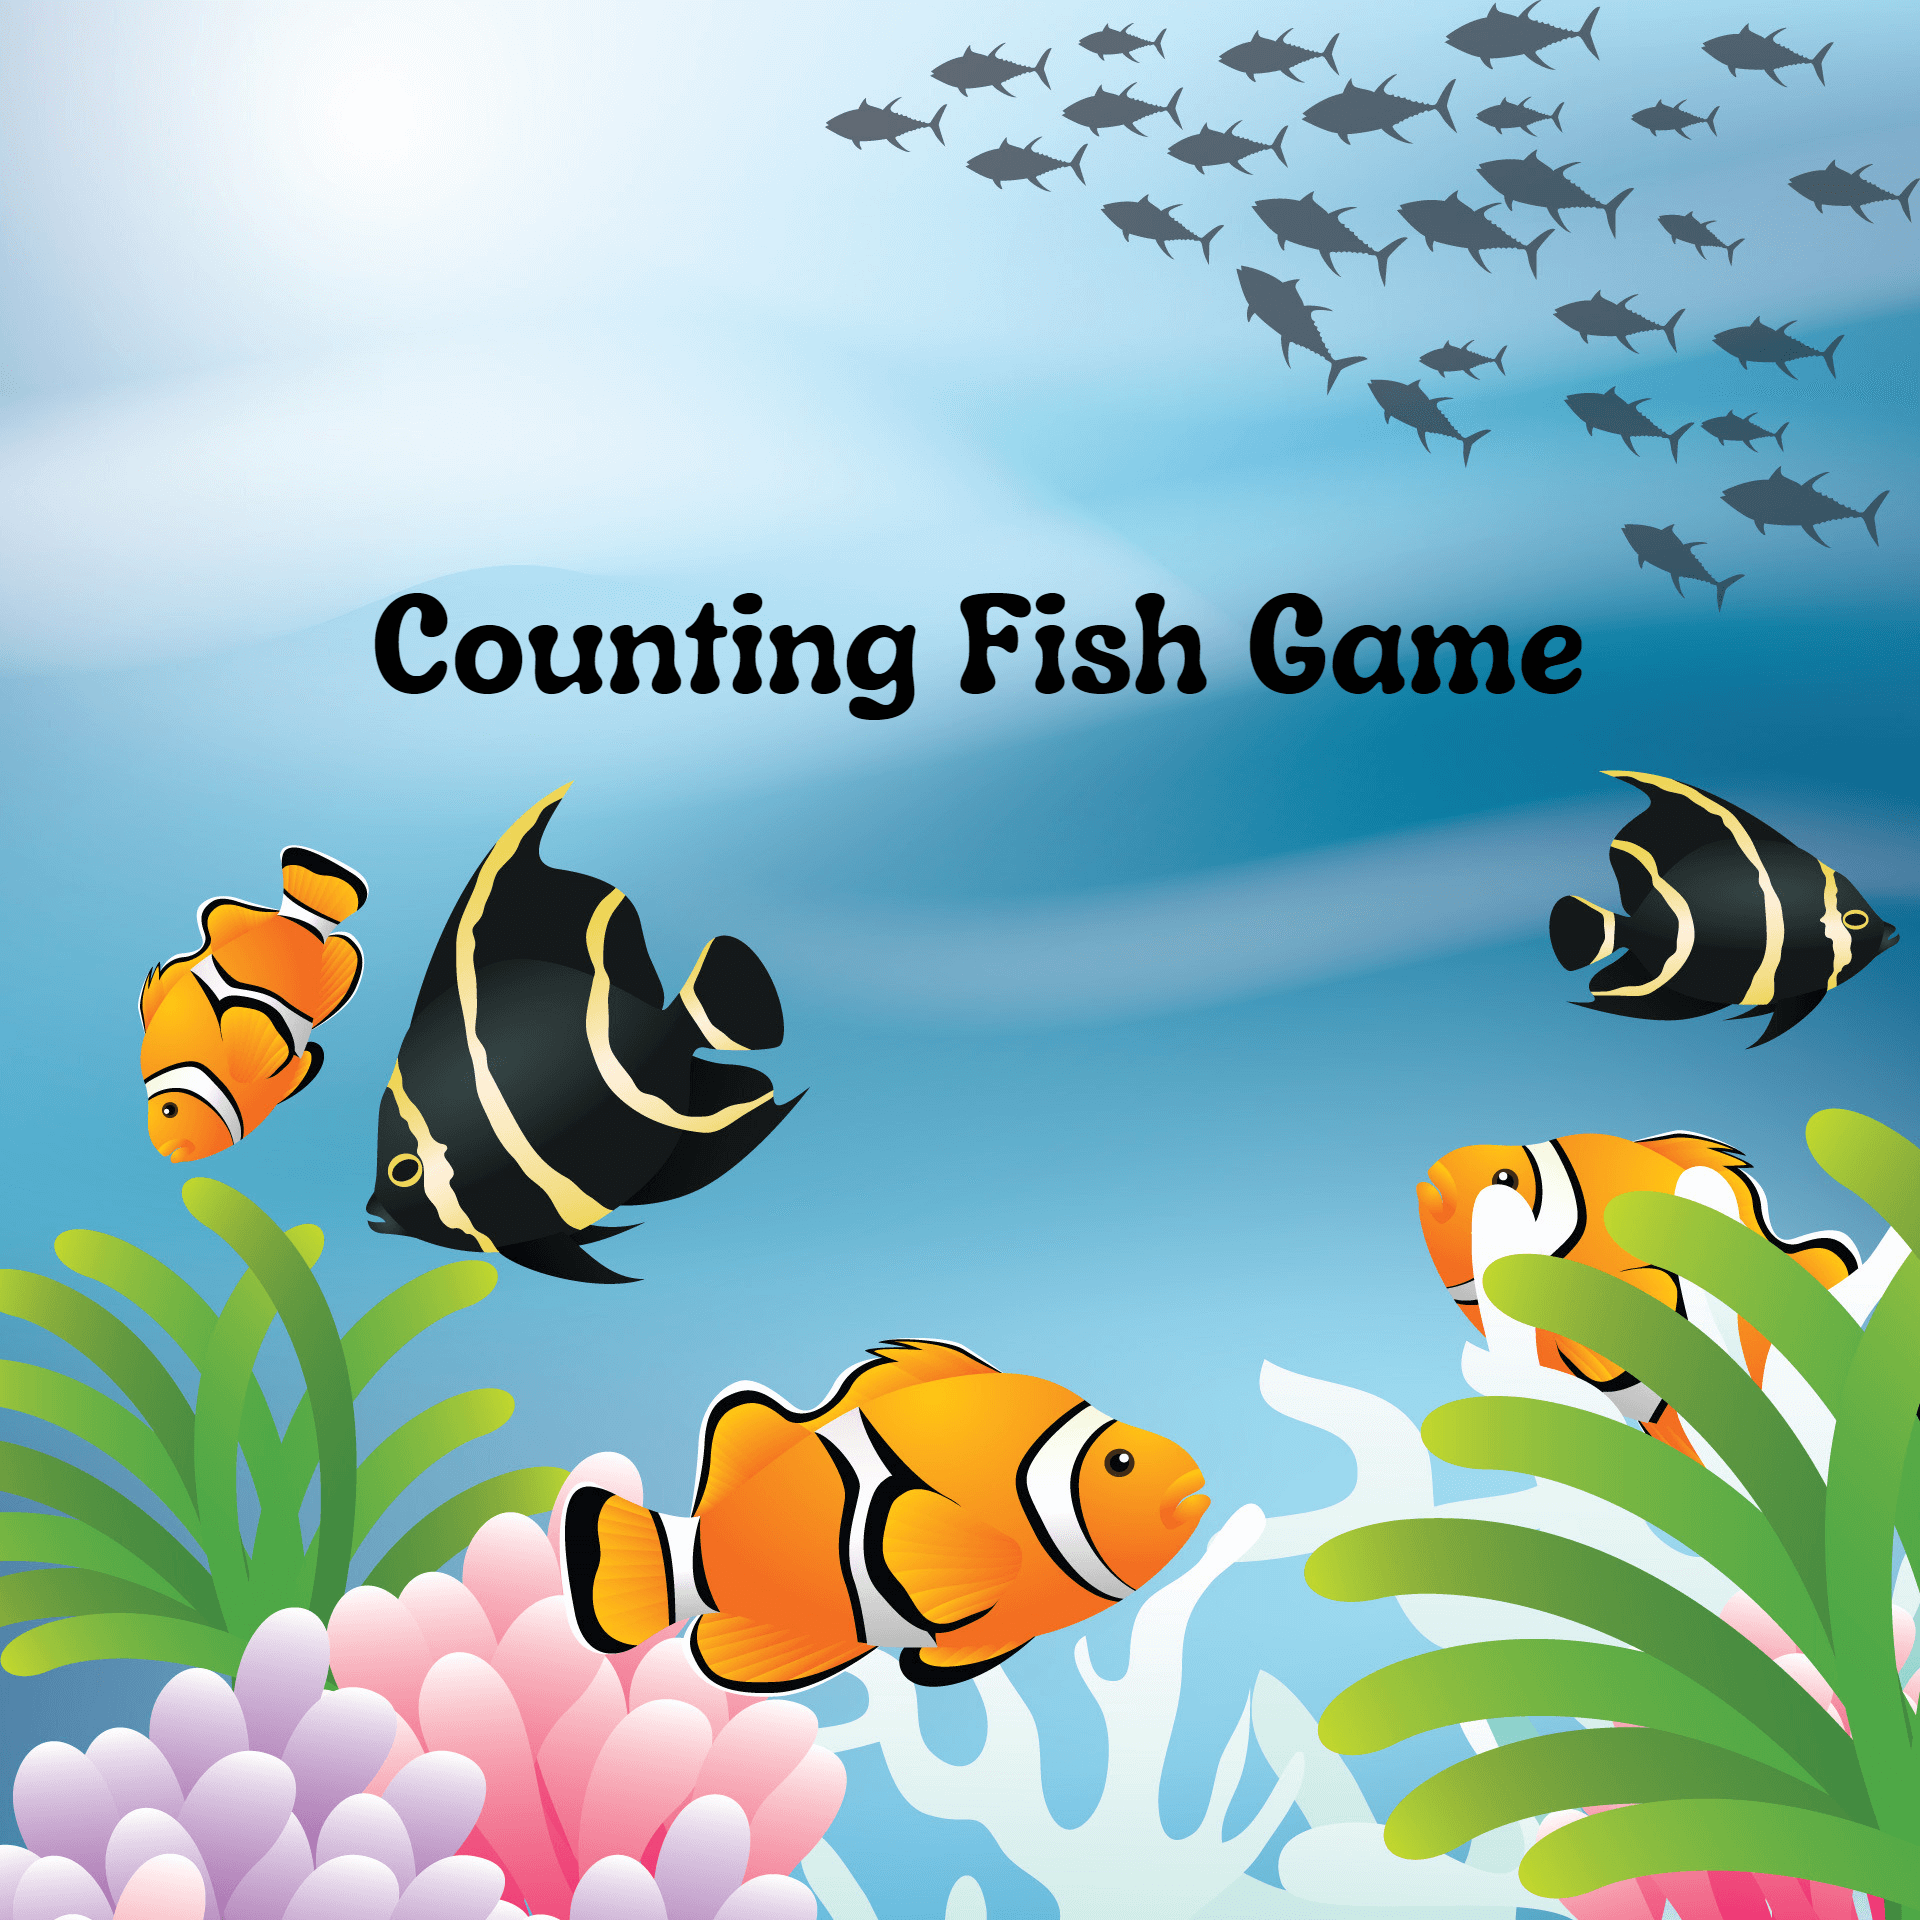 Fishes to count in Counting Fish Game